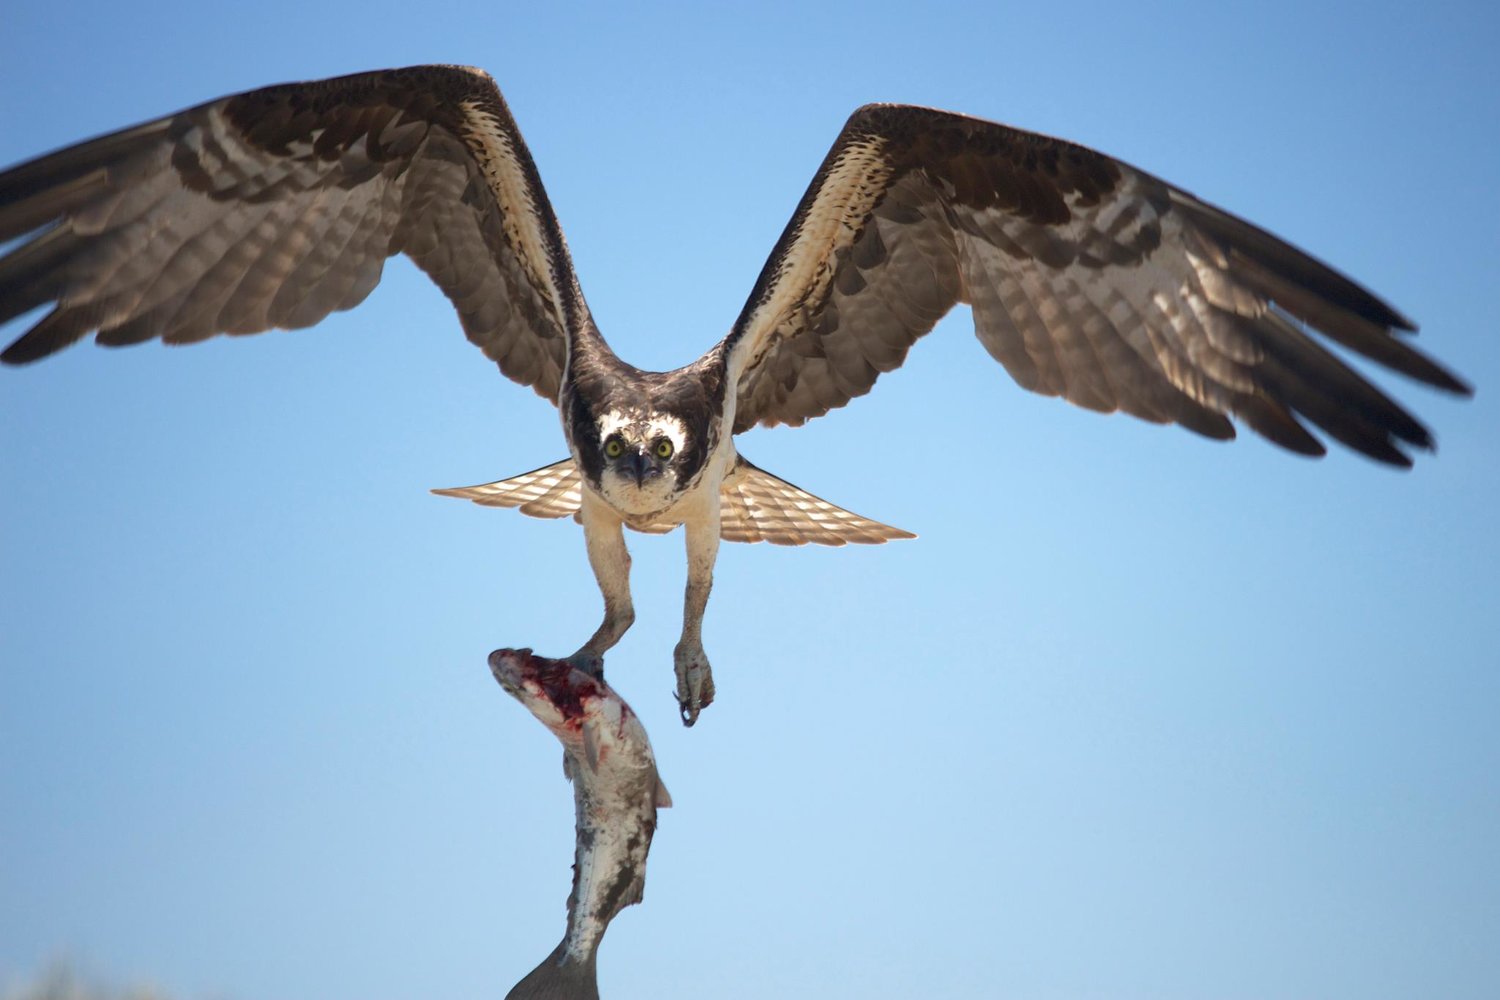 A picture taken by Nancy Jacobson of an osprey catching a fish.